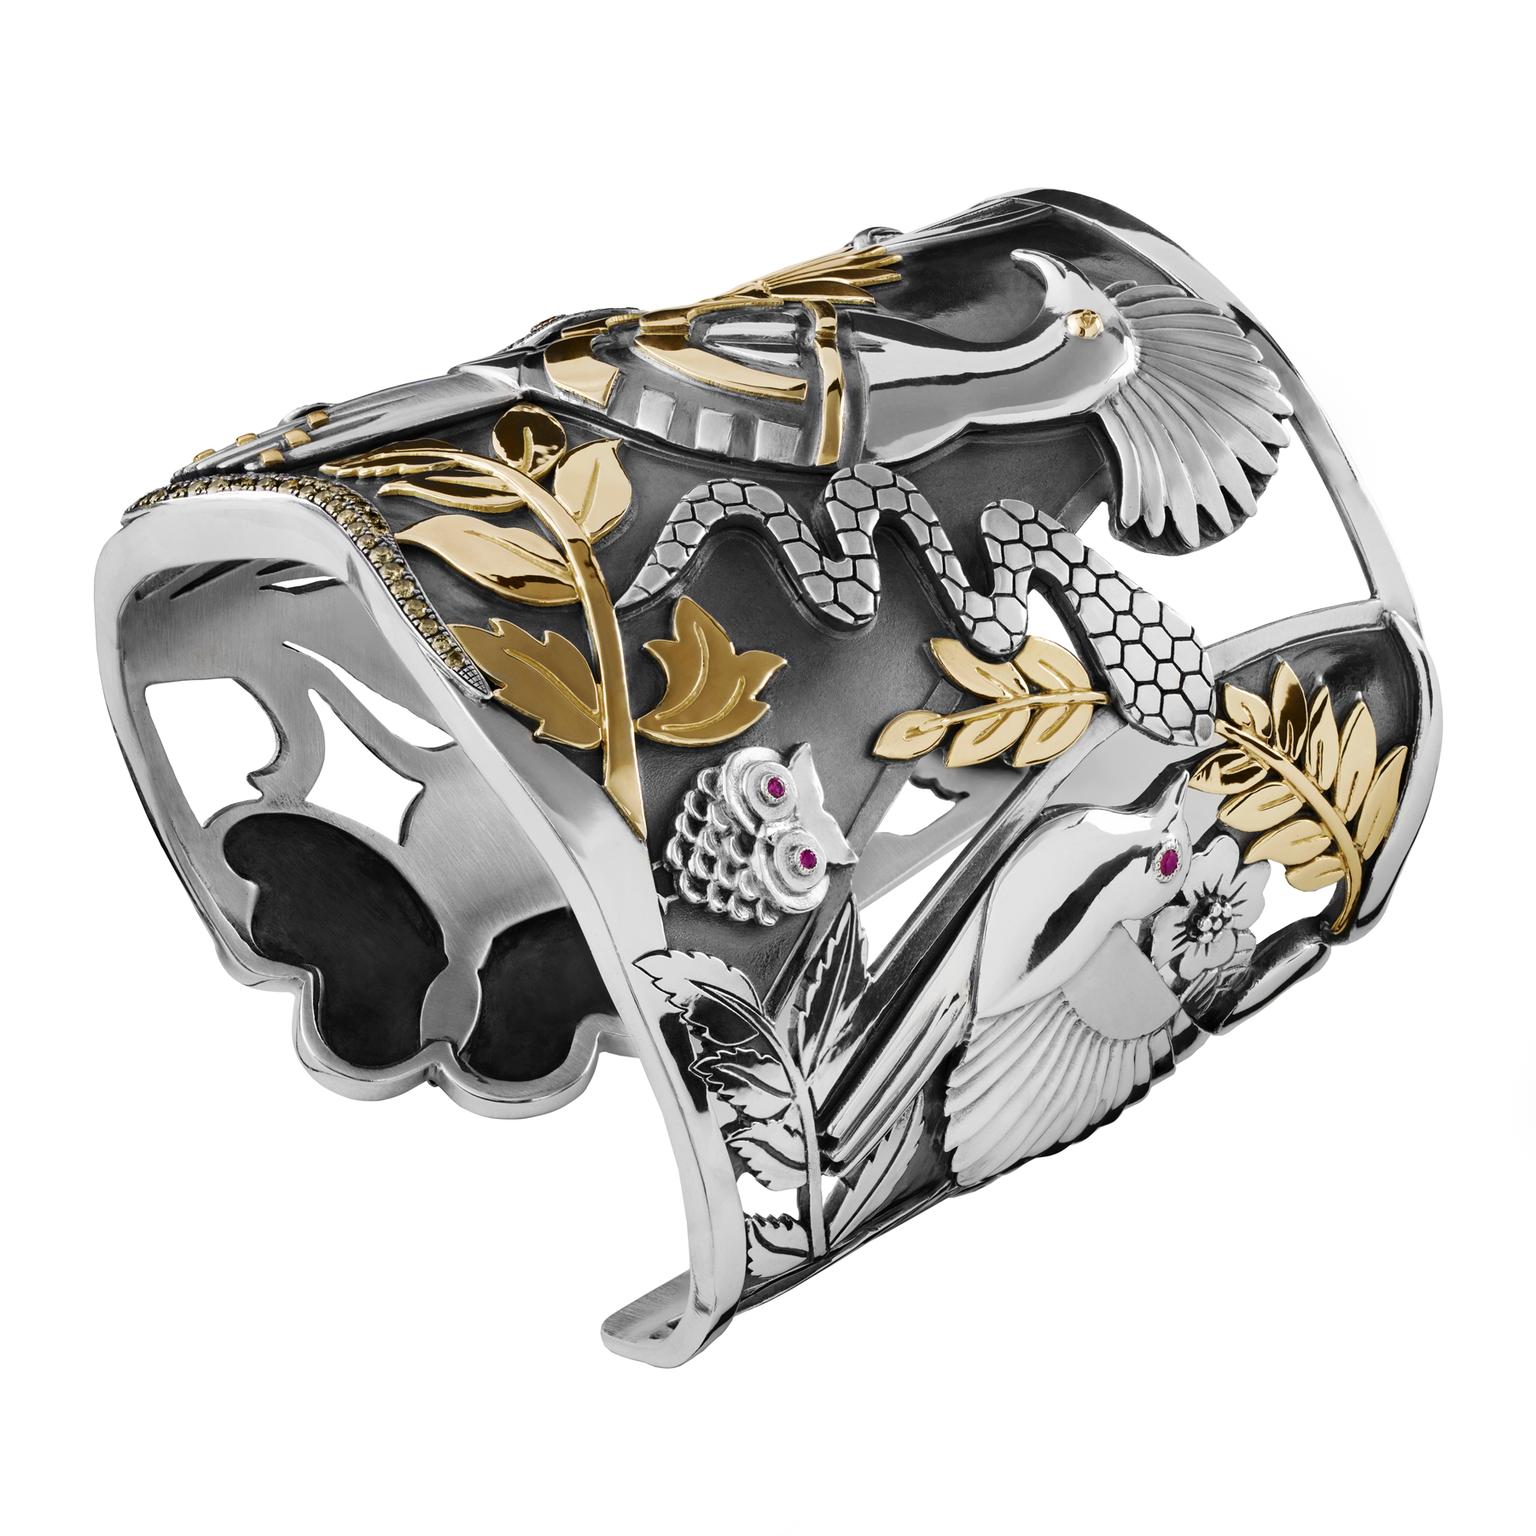 Azza Fahmy Wonders of Nature Hoopoe cuff with rubies and champagne diamonds